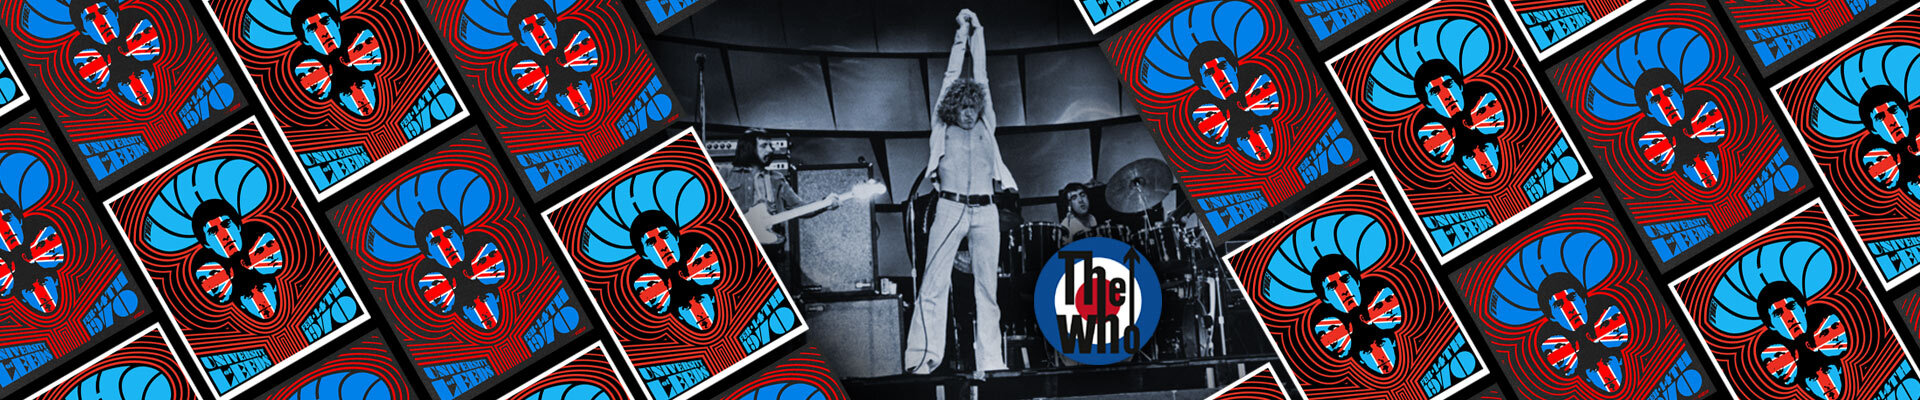 Behind the Poster: The Who, University of Leeds, February 14, 1970 (Print 2 of Set)